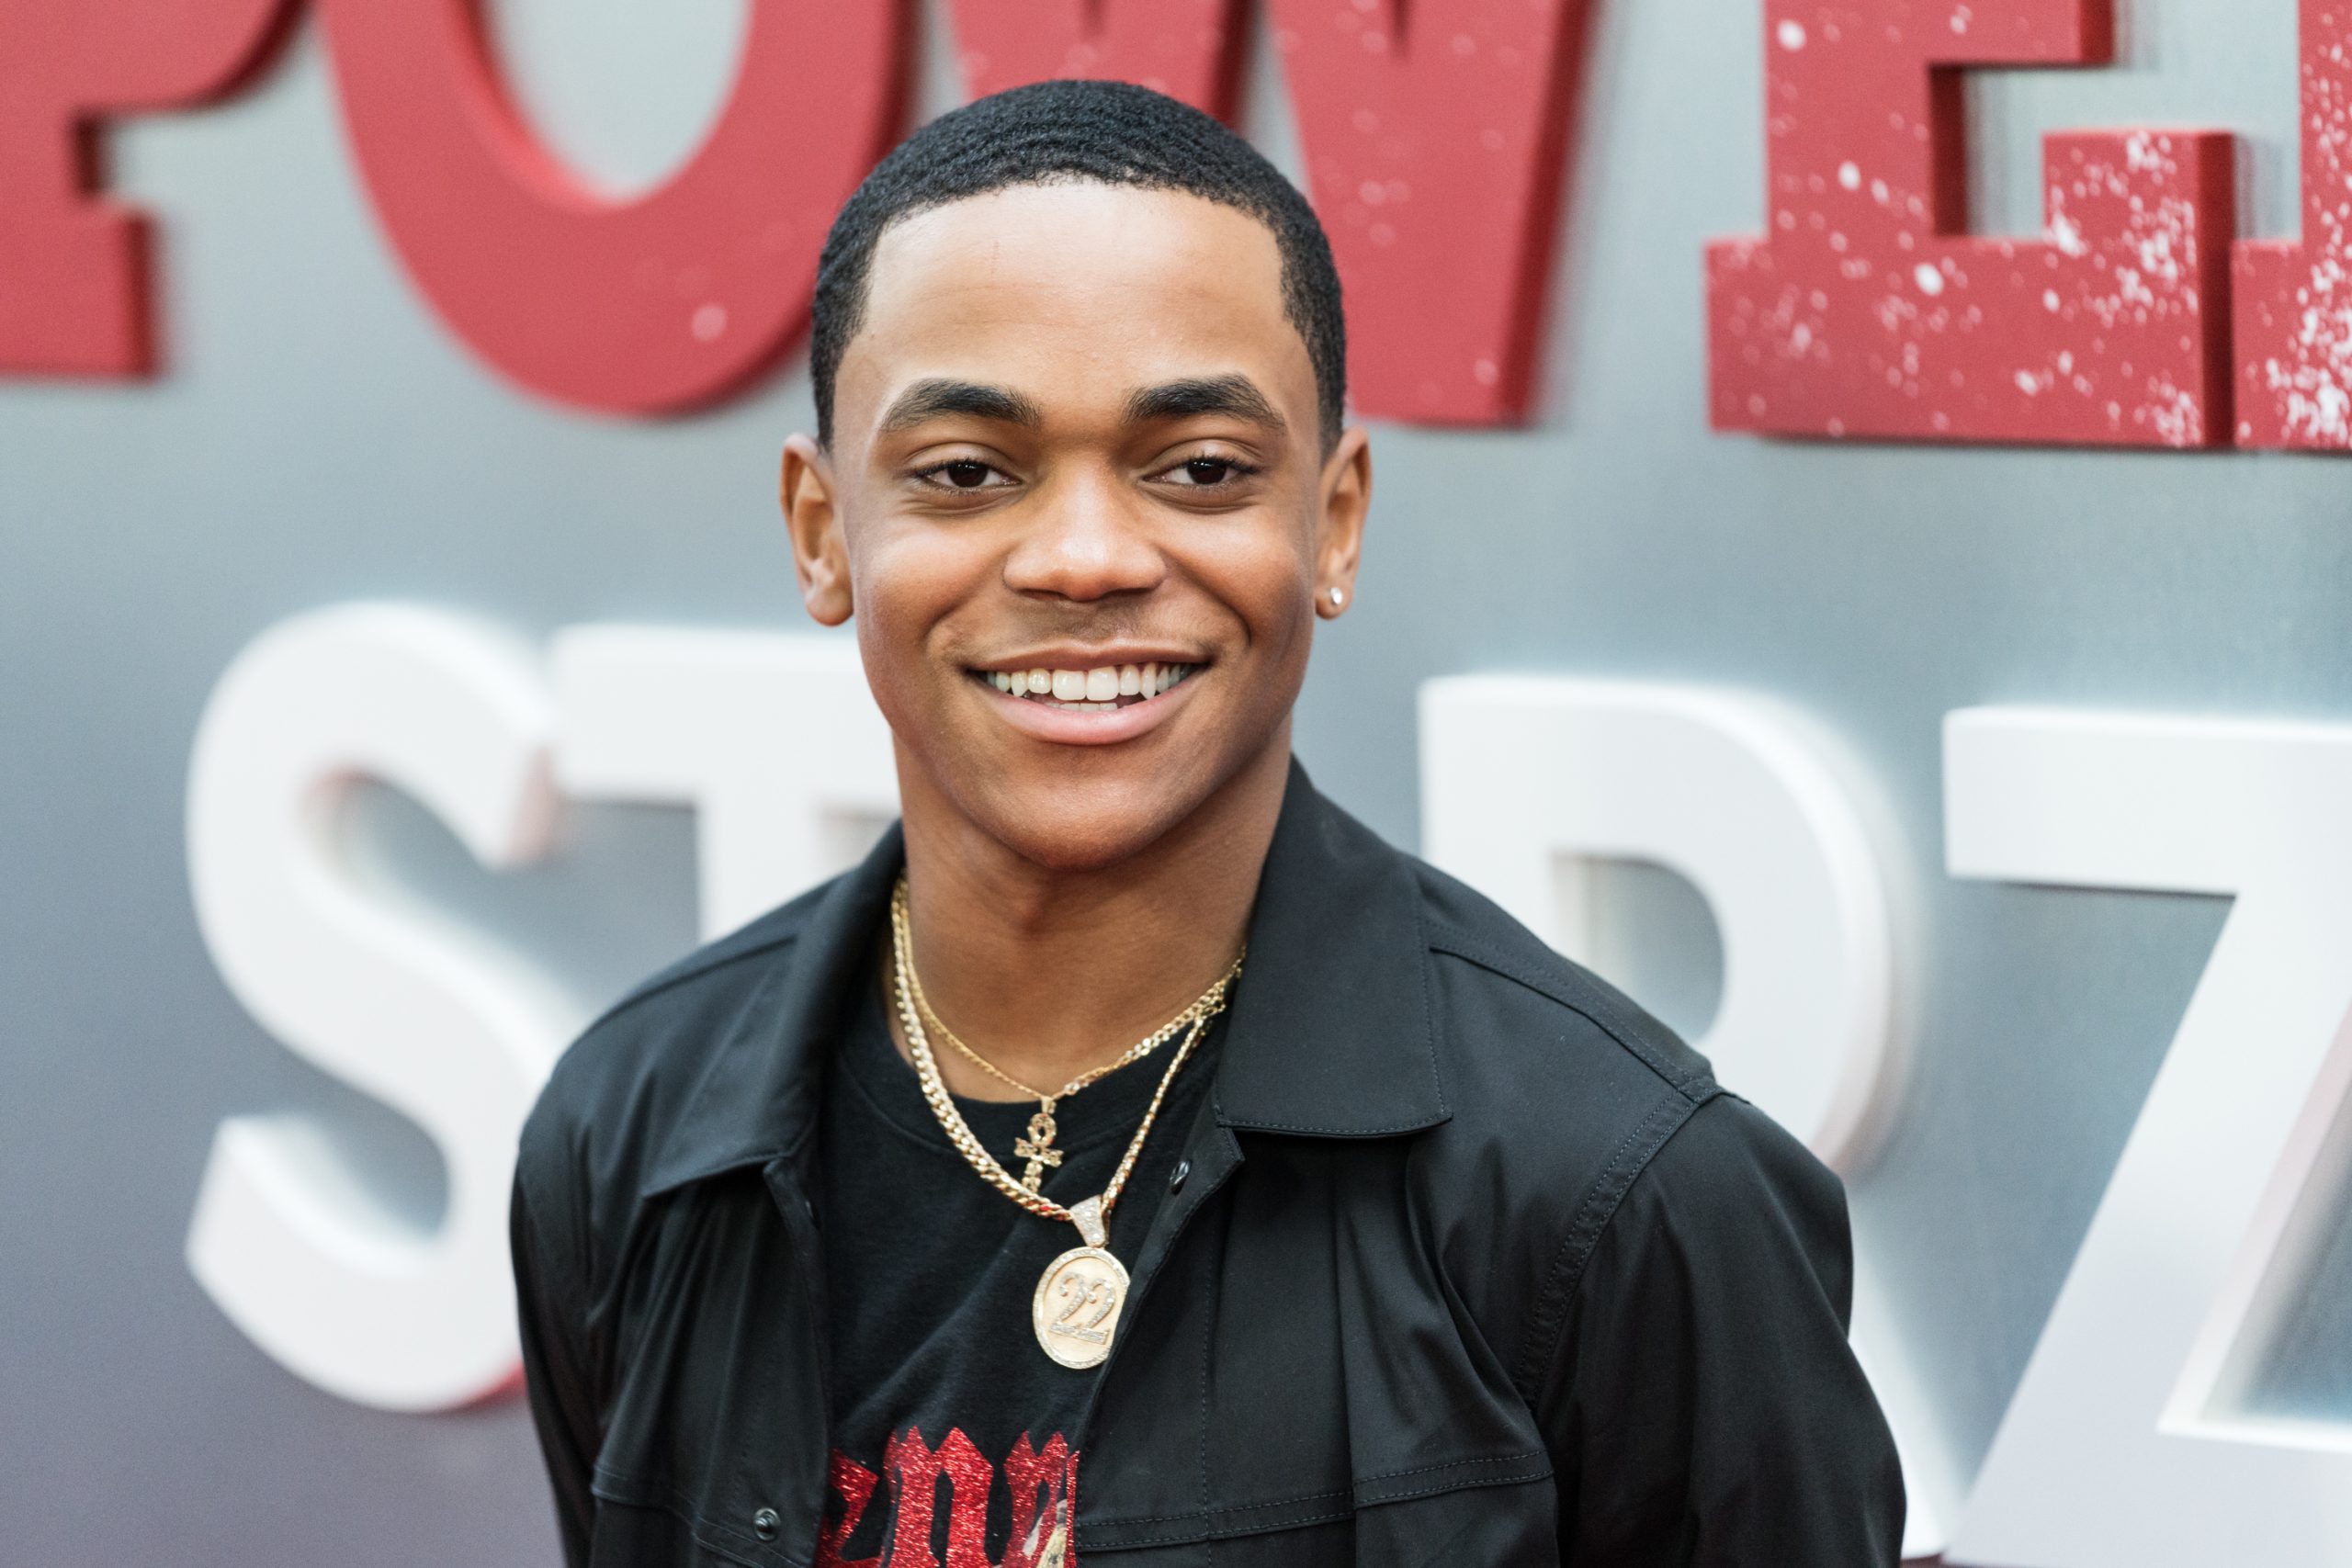 Michael Rainey Jr. Shares Unsettling Video of Being Stopped By NYPD